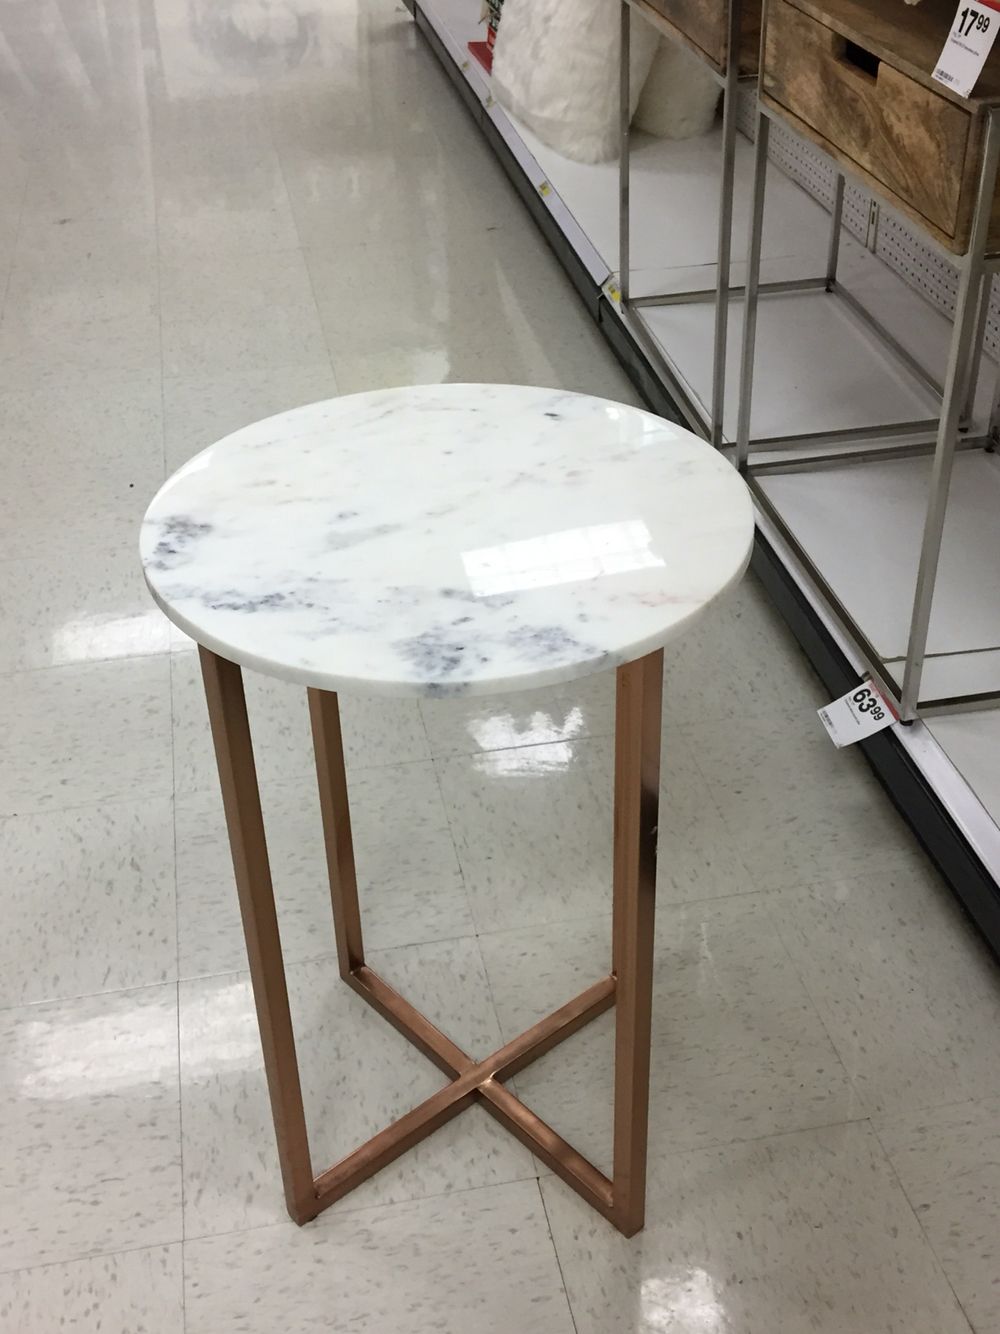 hey people you have pinned this table took ture target accent marble top the and uploaded board from phone unfortunately haven seen retro bedroom chair sage green side trade